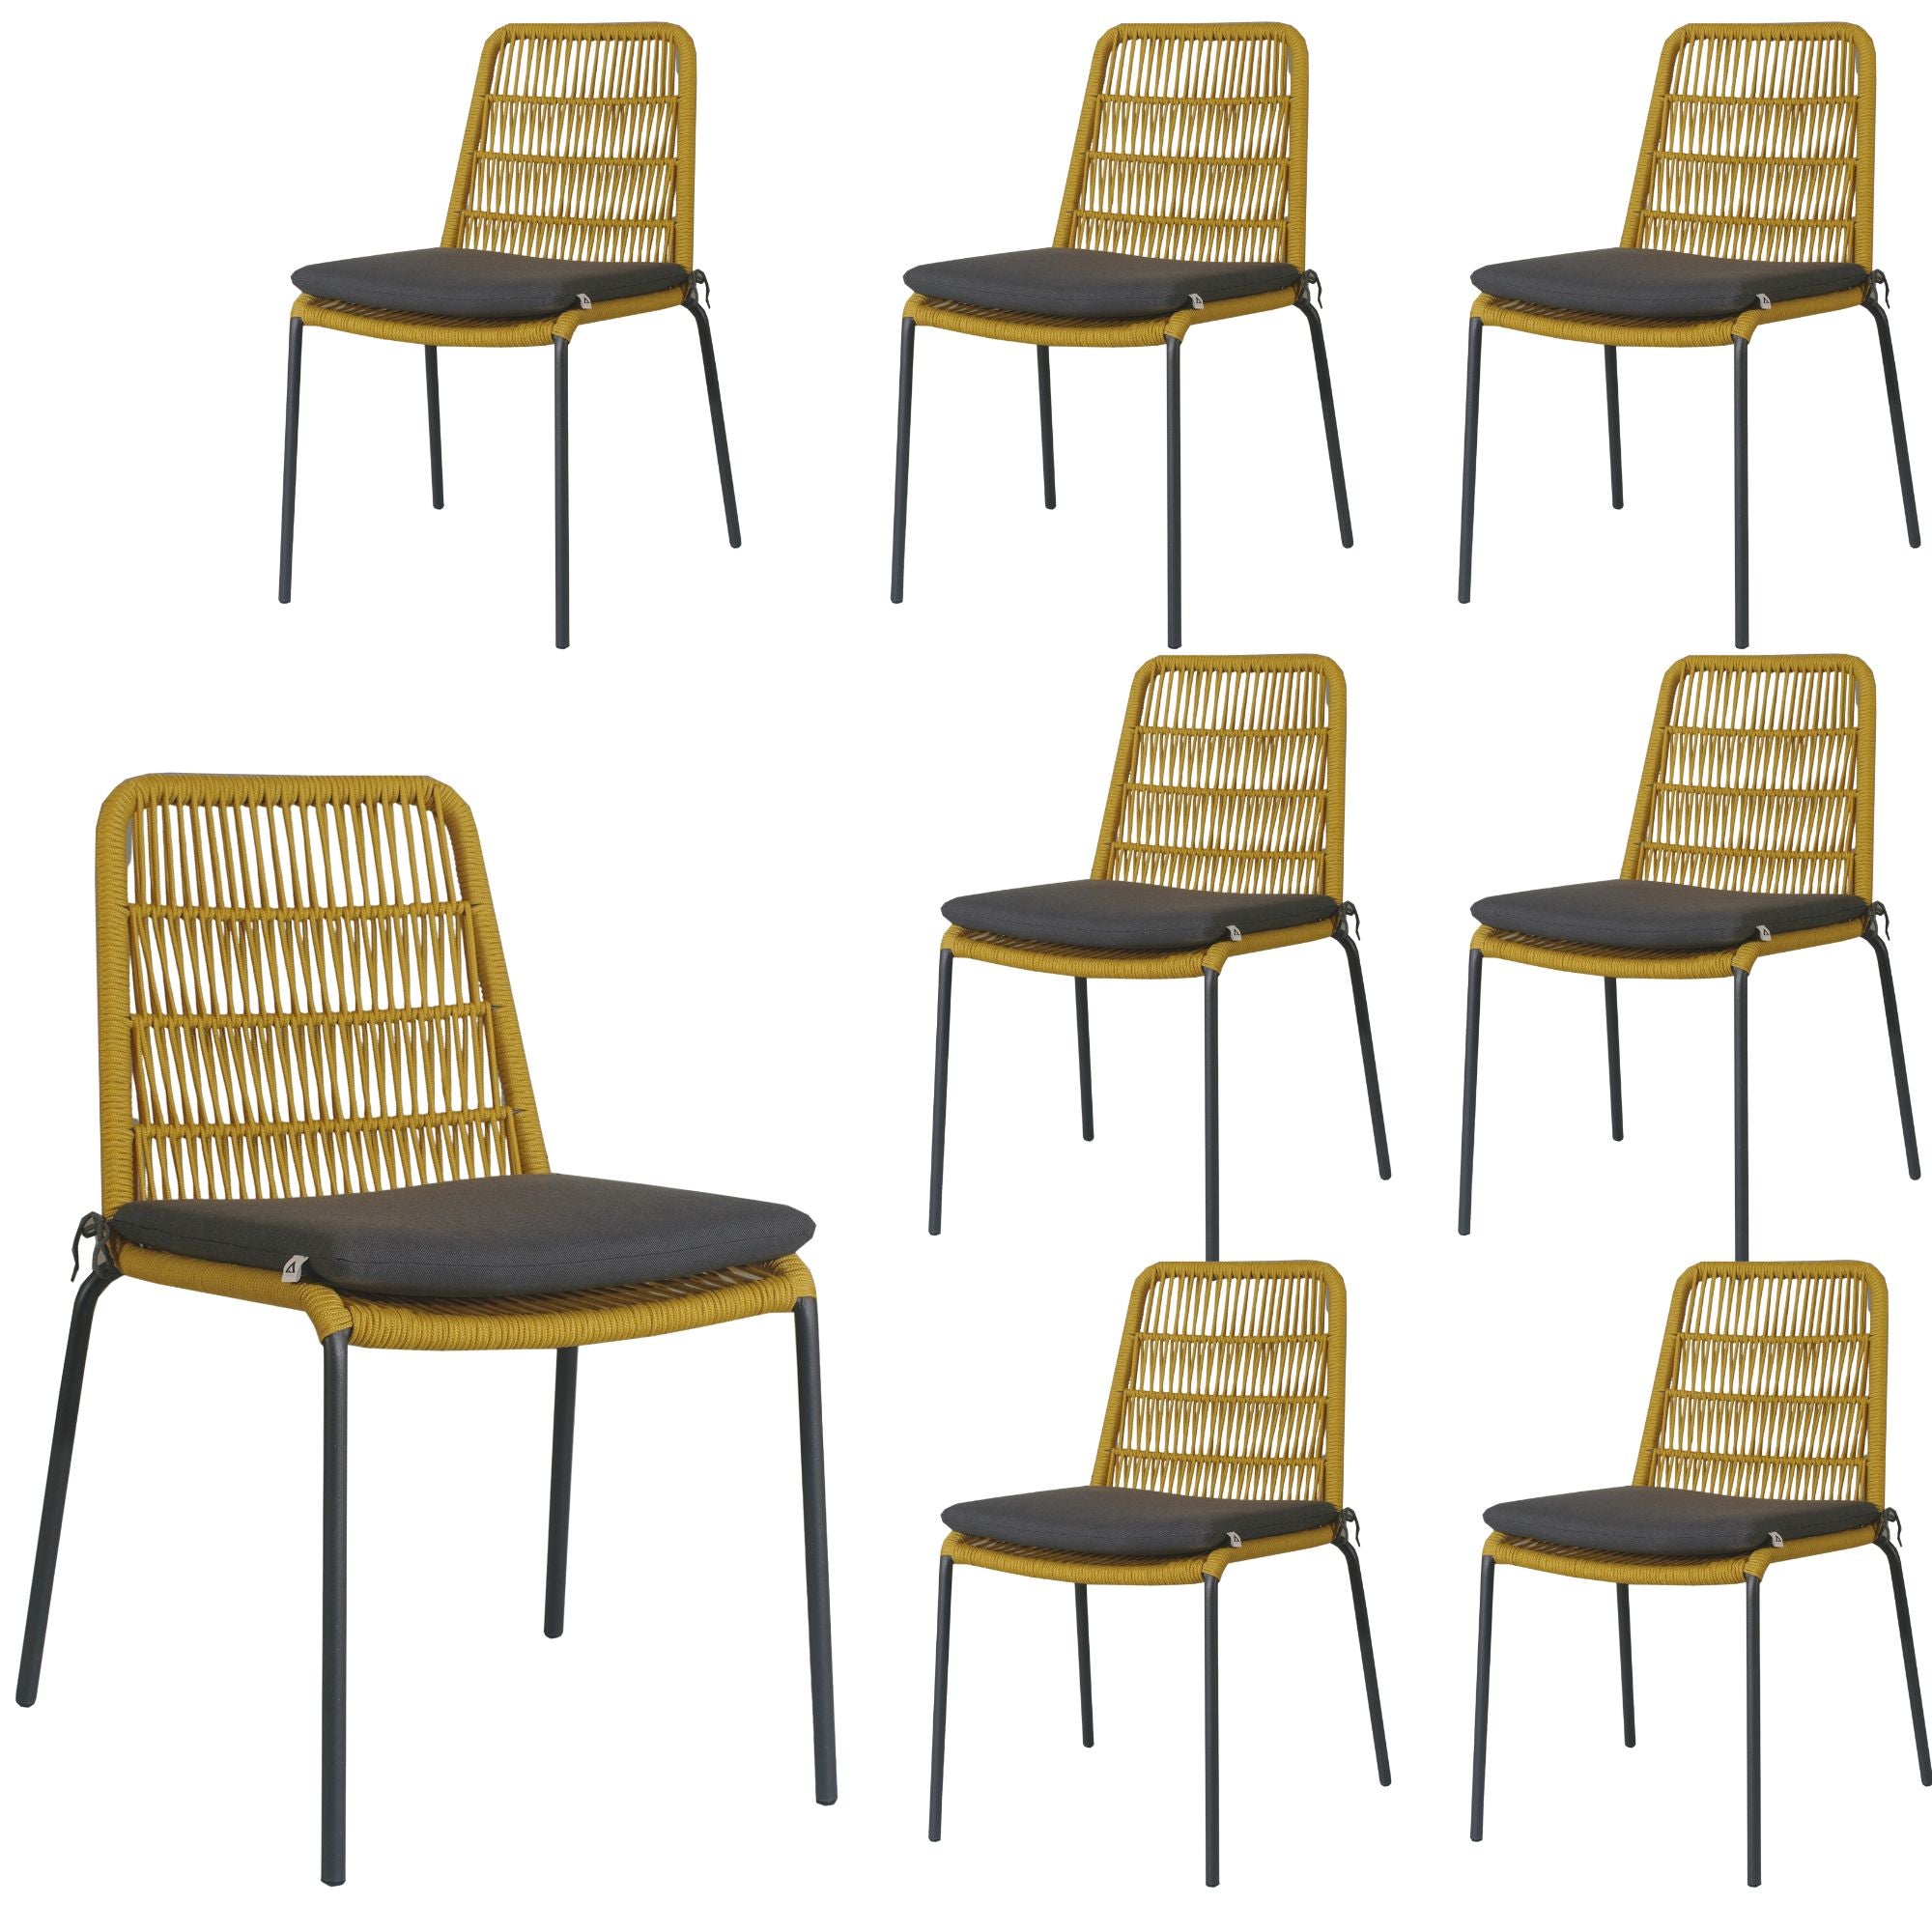 8pc Yellow Waterproof Rope Dining Chairs, Steel Frame